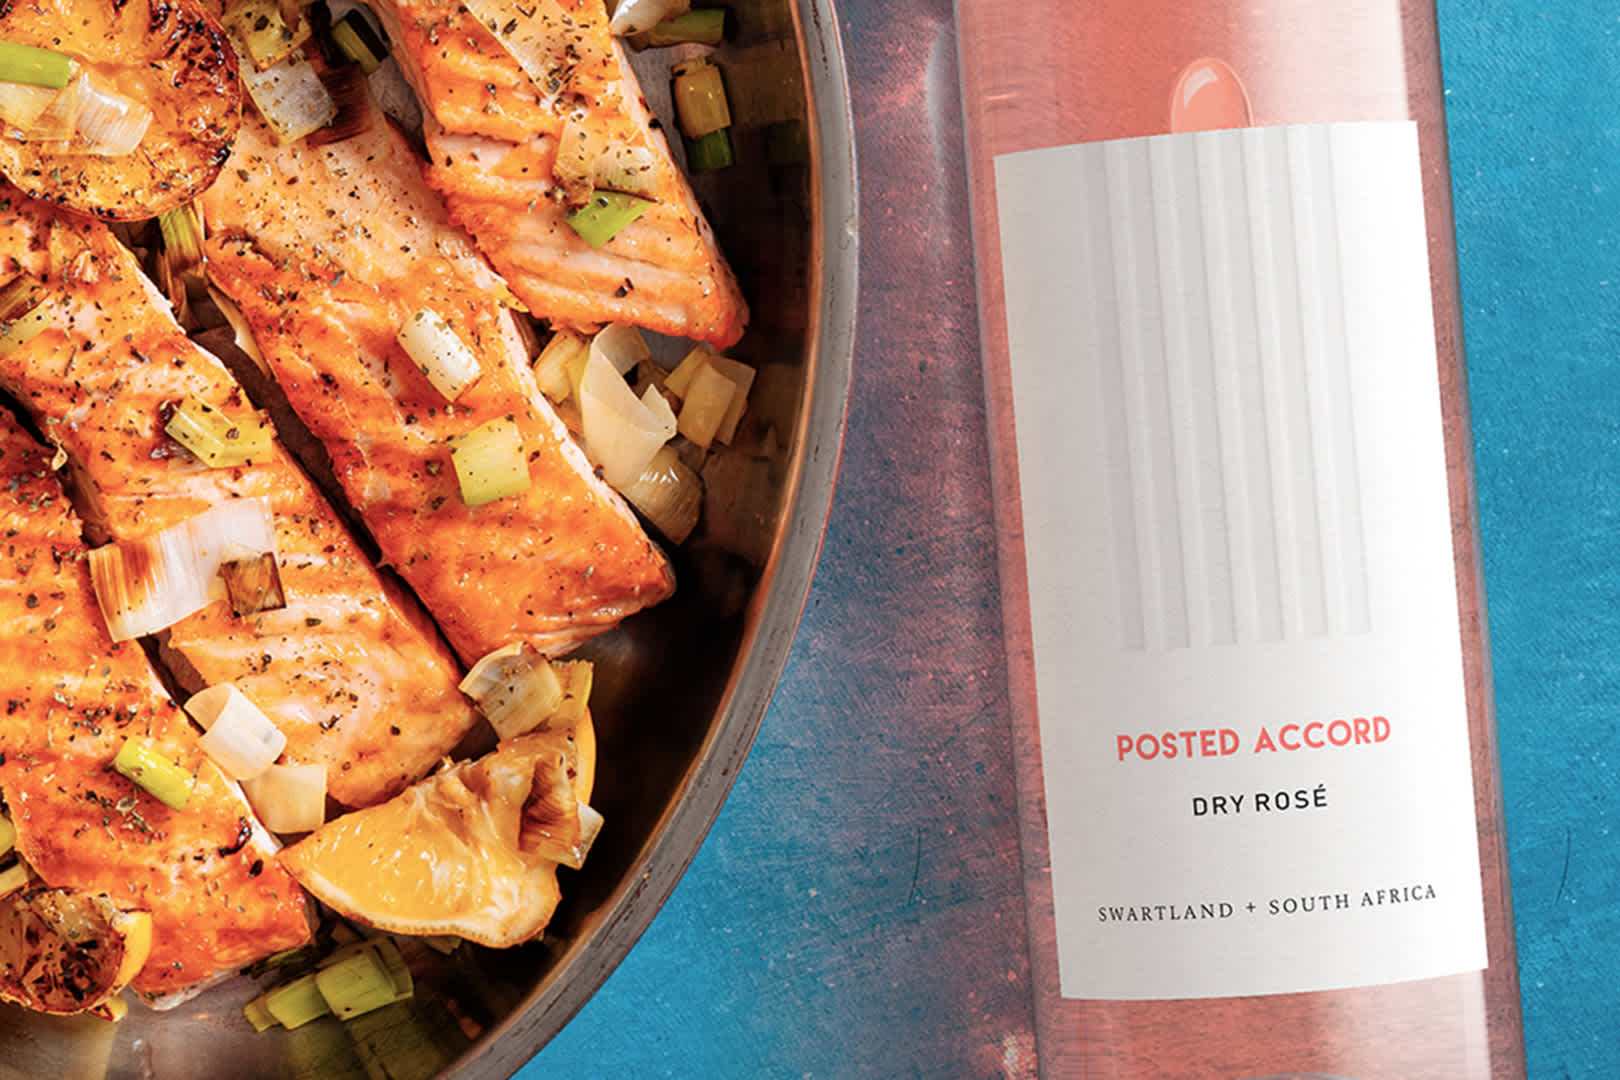 Fuller-bodied rosé styles like our plump and fruity Posted Accord Dry Rosé perfectly complement baked salmon.